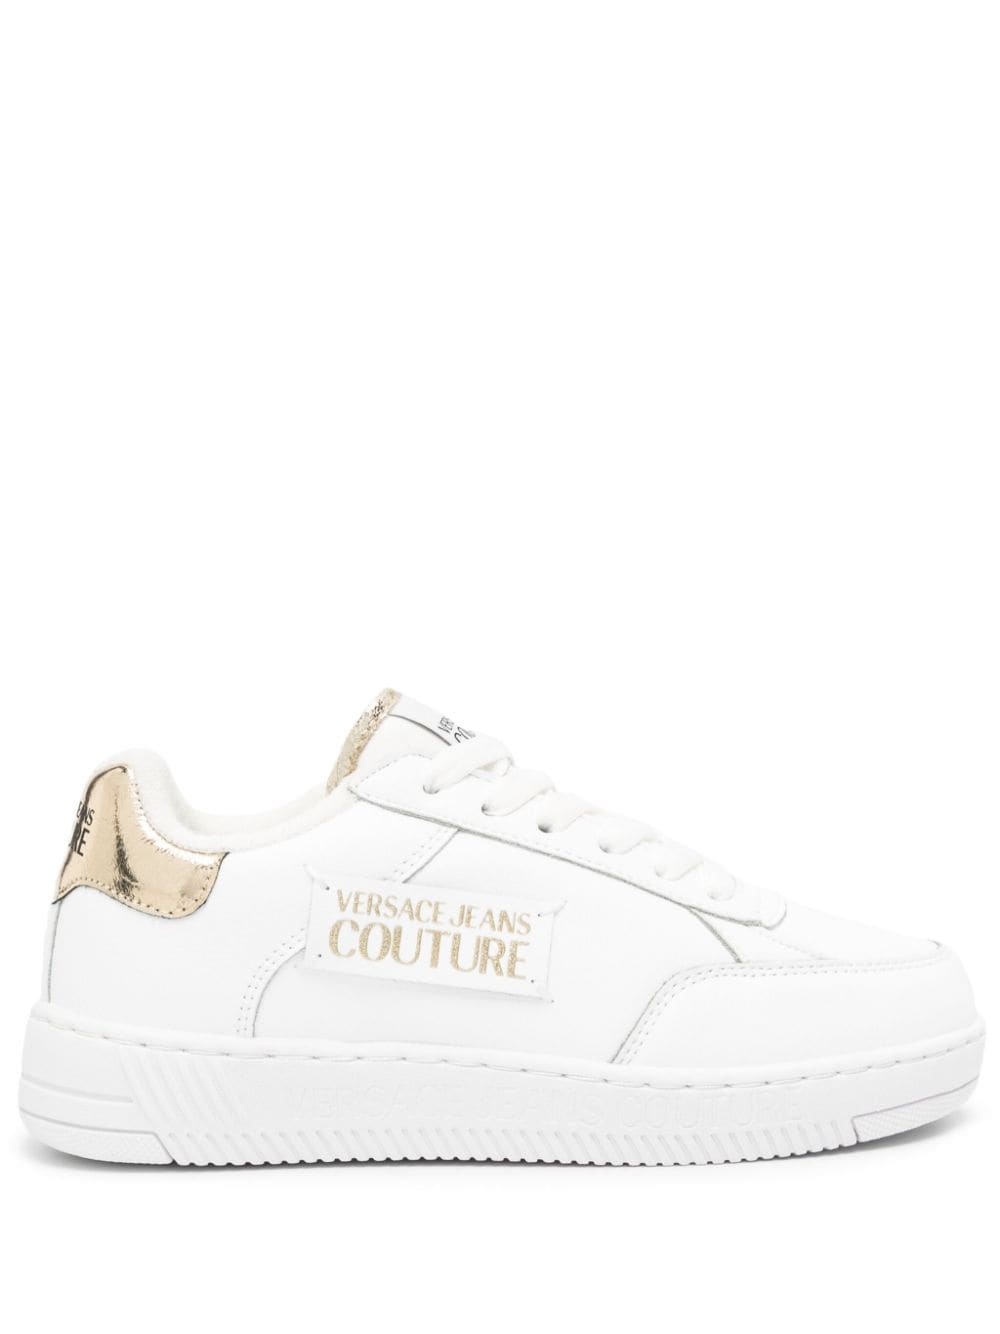 Image 1 of Versace Jeans Couture Meyssa logo-patch sneakers